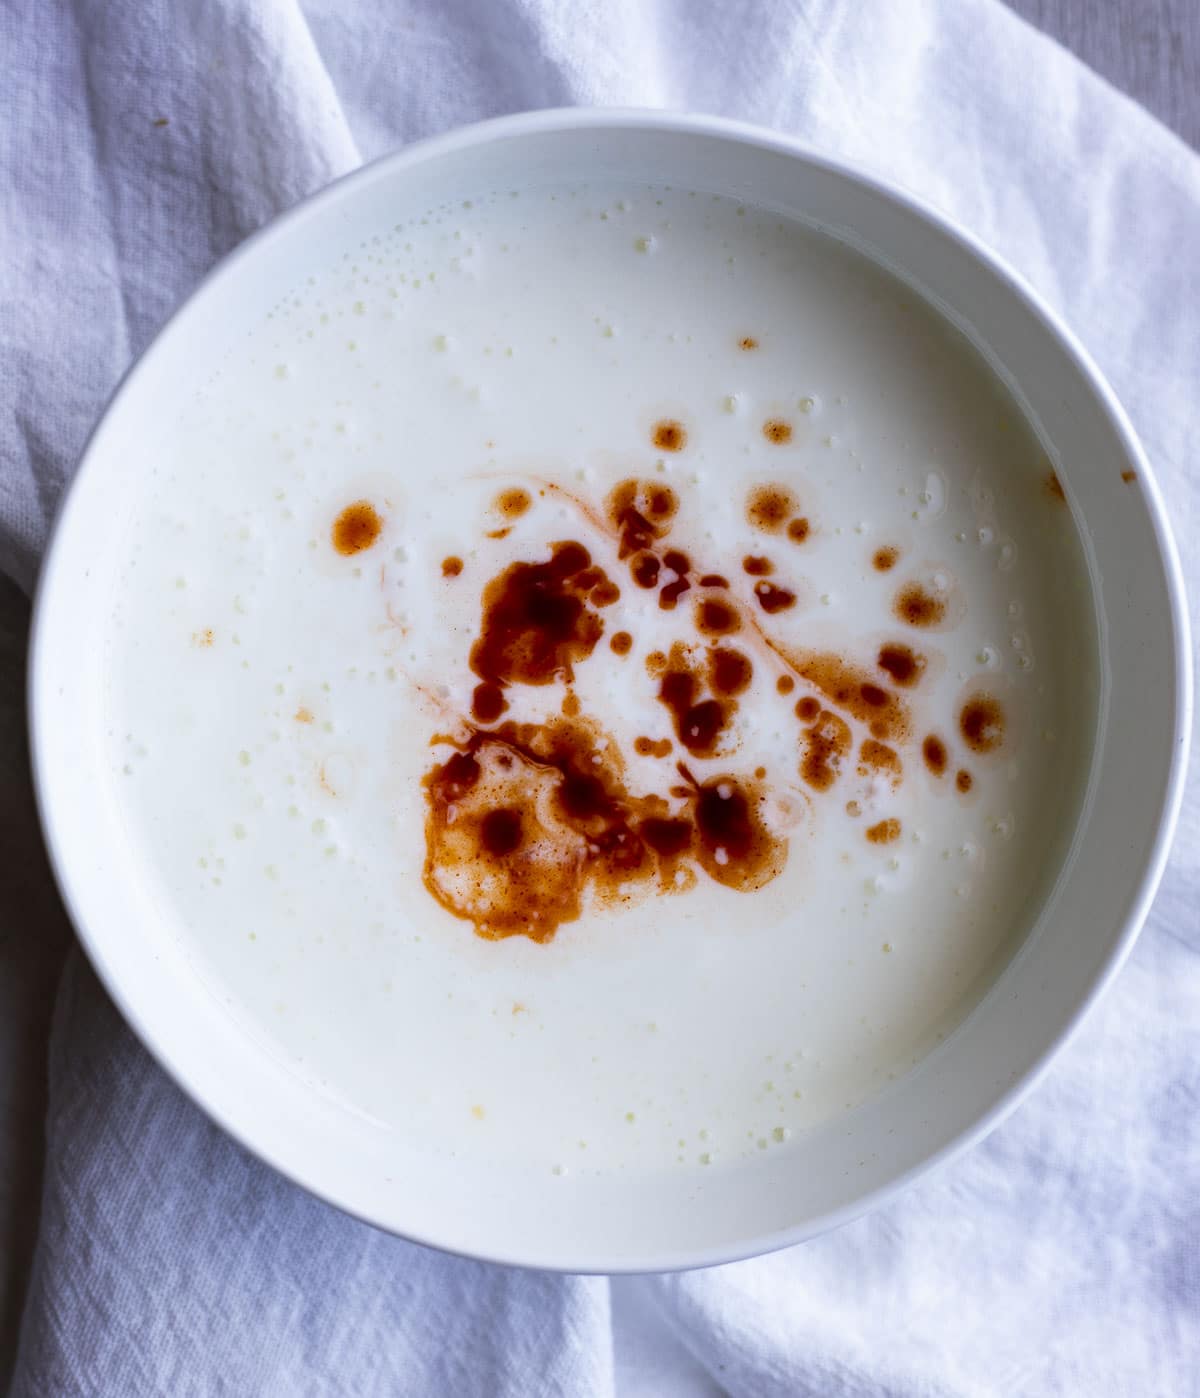 Buttermilk and hot sauce together in a bowl.